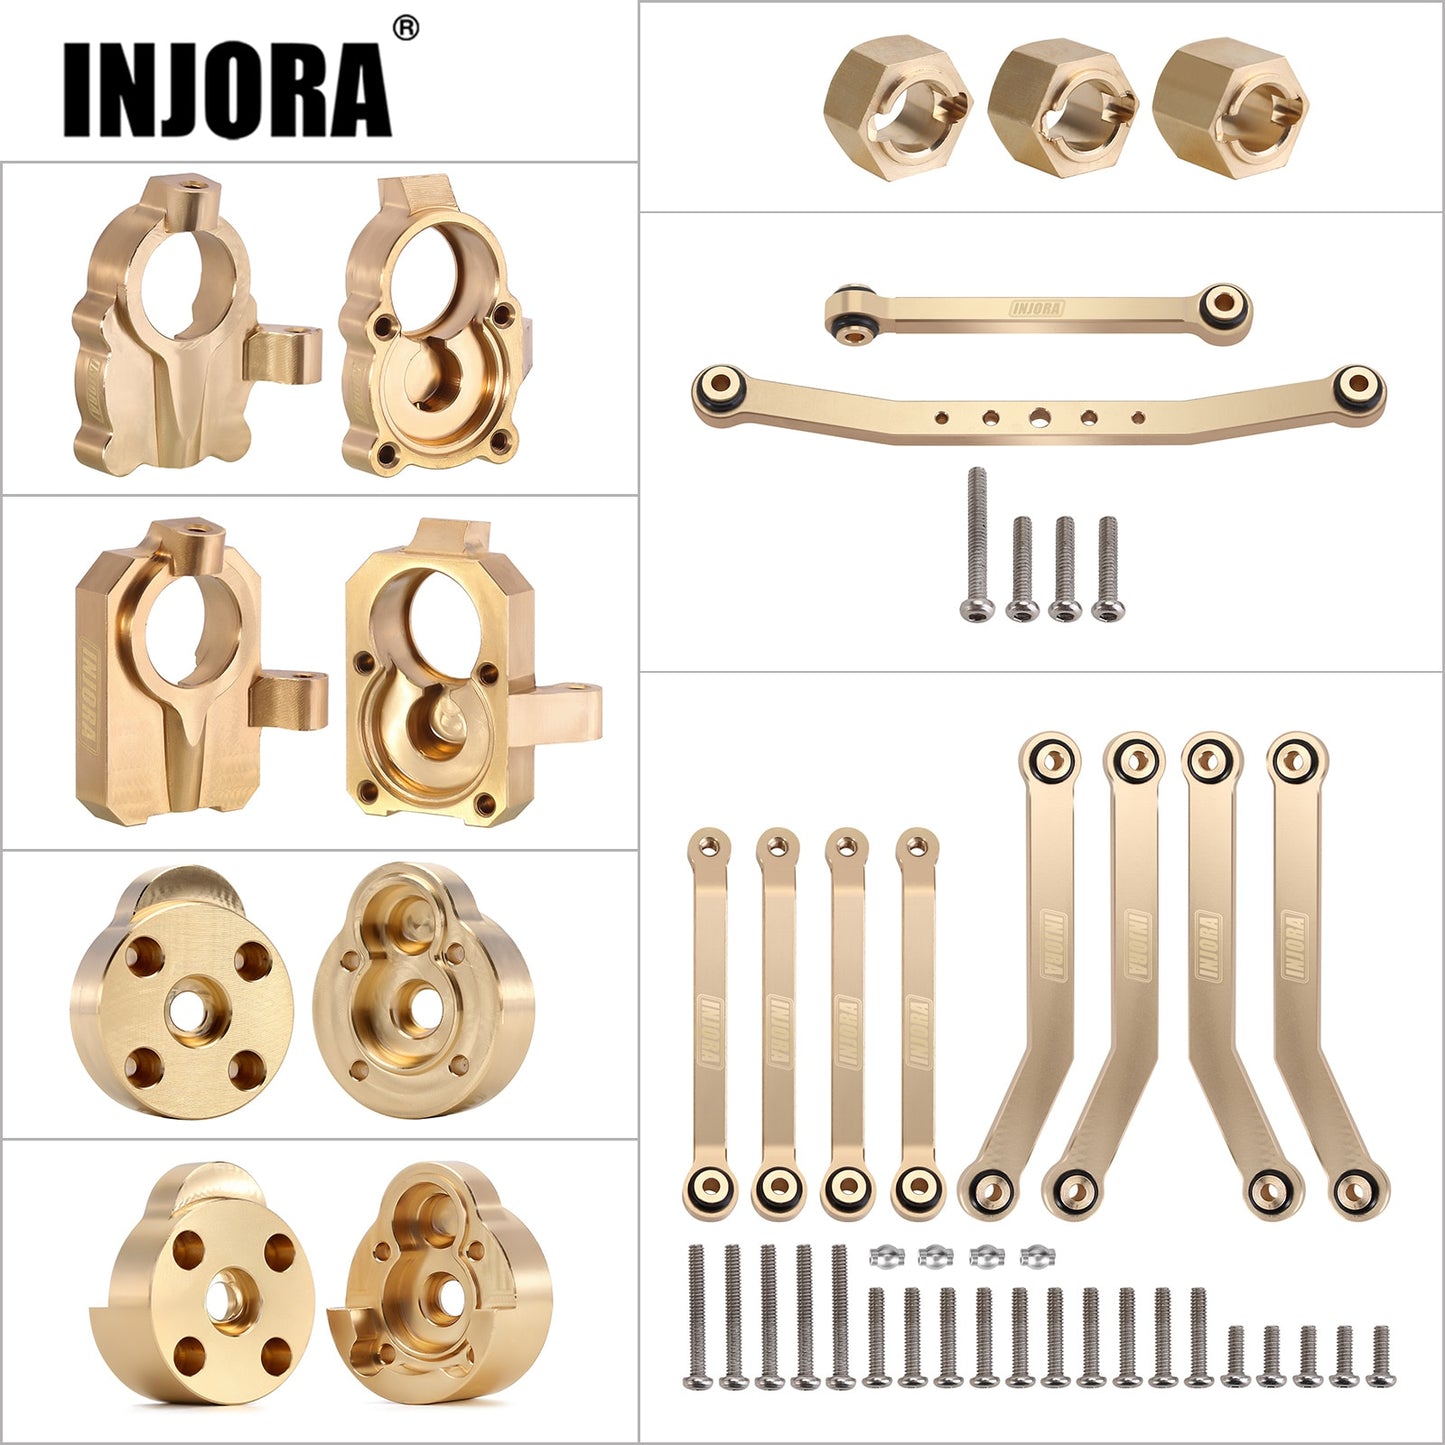 INJORA Brass Portal Drive Housing Steering Knuckles Chassis Links Wheel Hex Upgrade Parts For 1/24 RC Crawler FMS FCX24